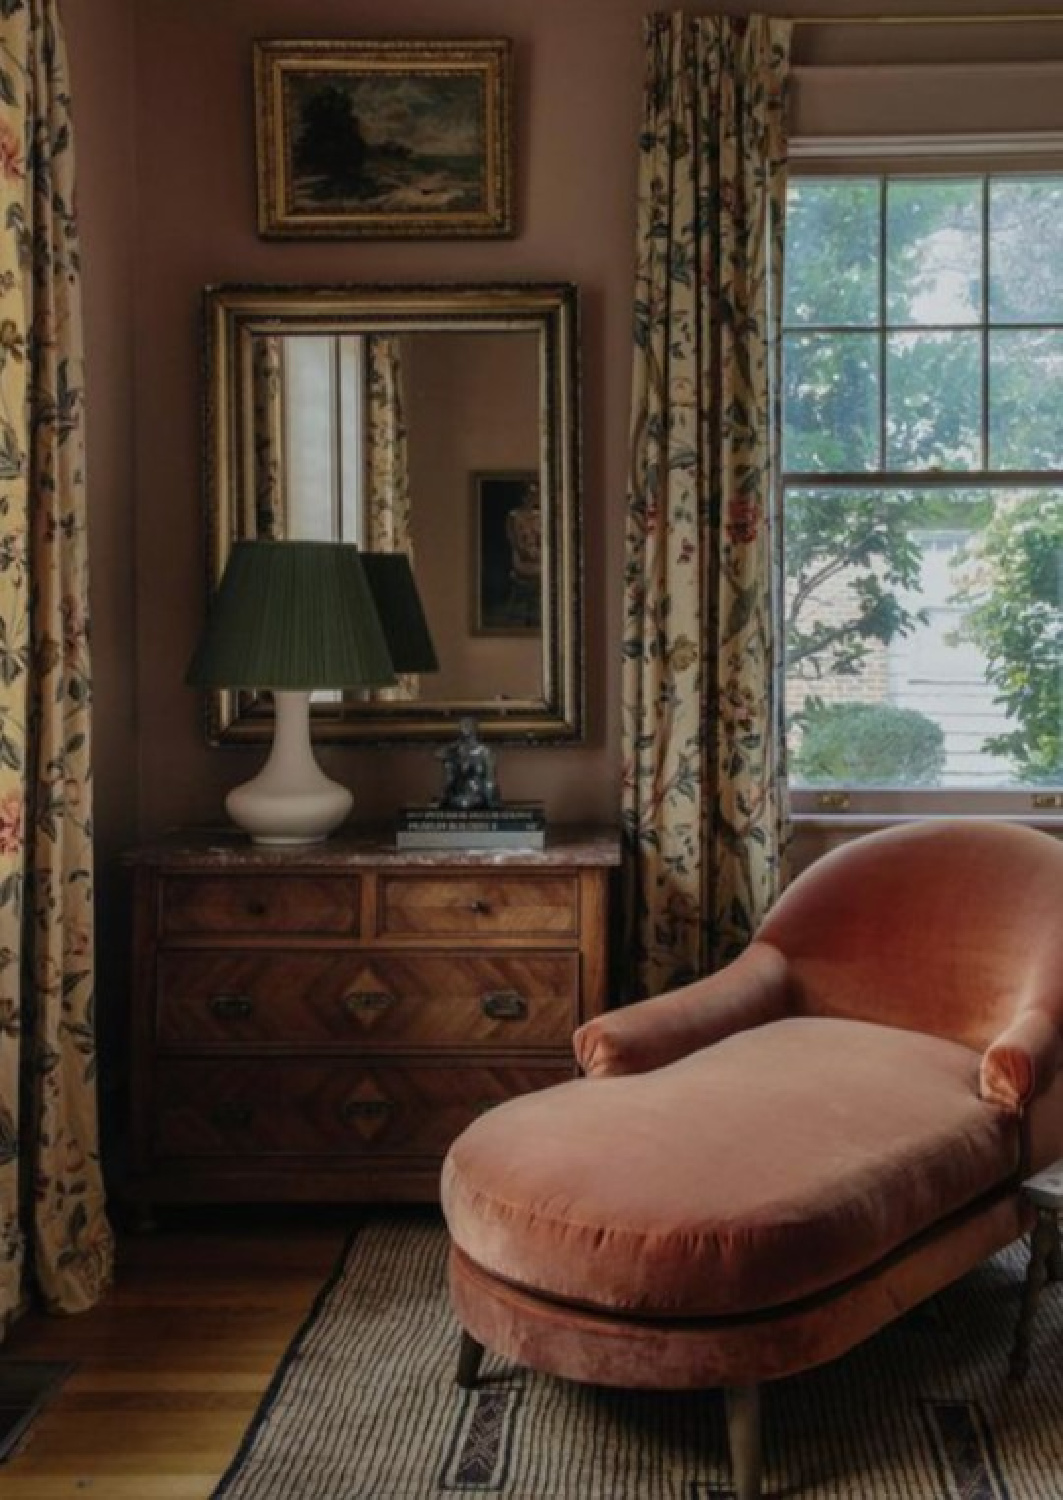 Carley Page Summers designed warm European cozy interior with rosy pink chaise and traditional furnishings. #europeancottage #warmcozyinteriors #rusticelegance #europeancountry